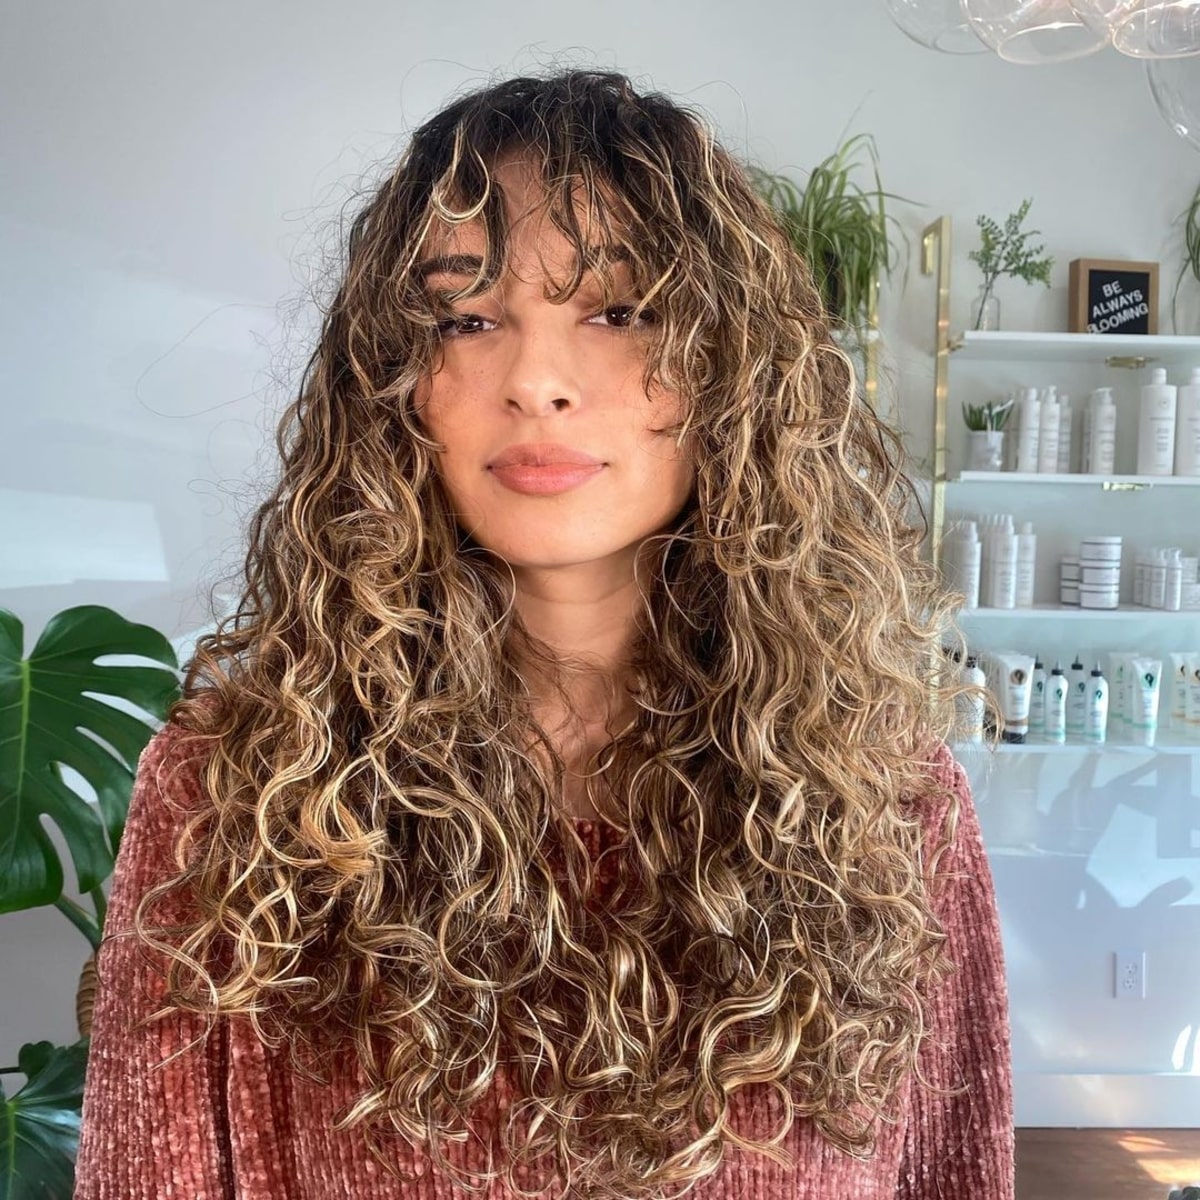 10 Most Popular Ways to Get Curly Hair with Bangs Right Now